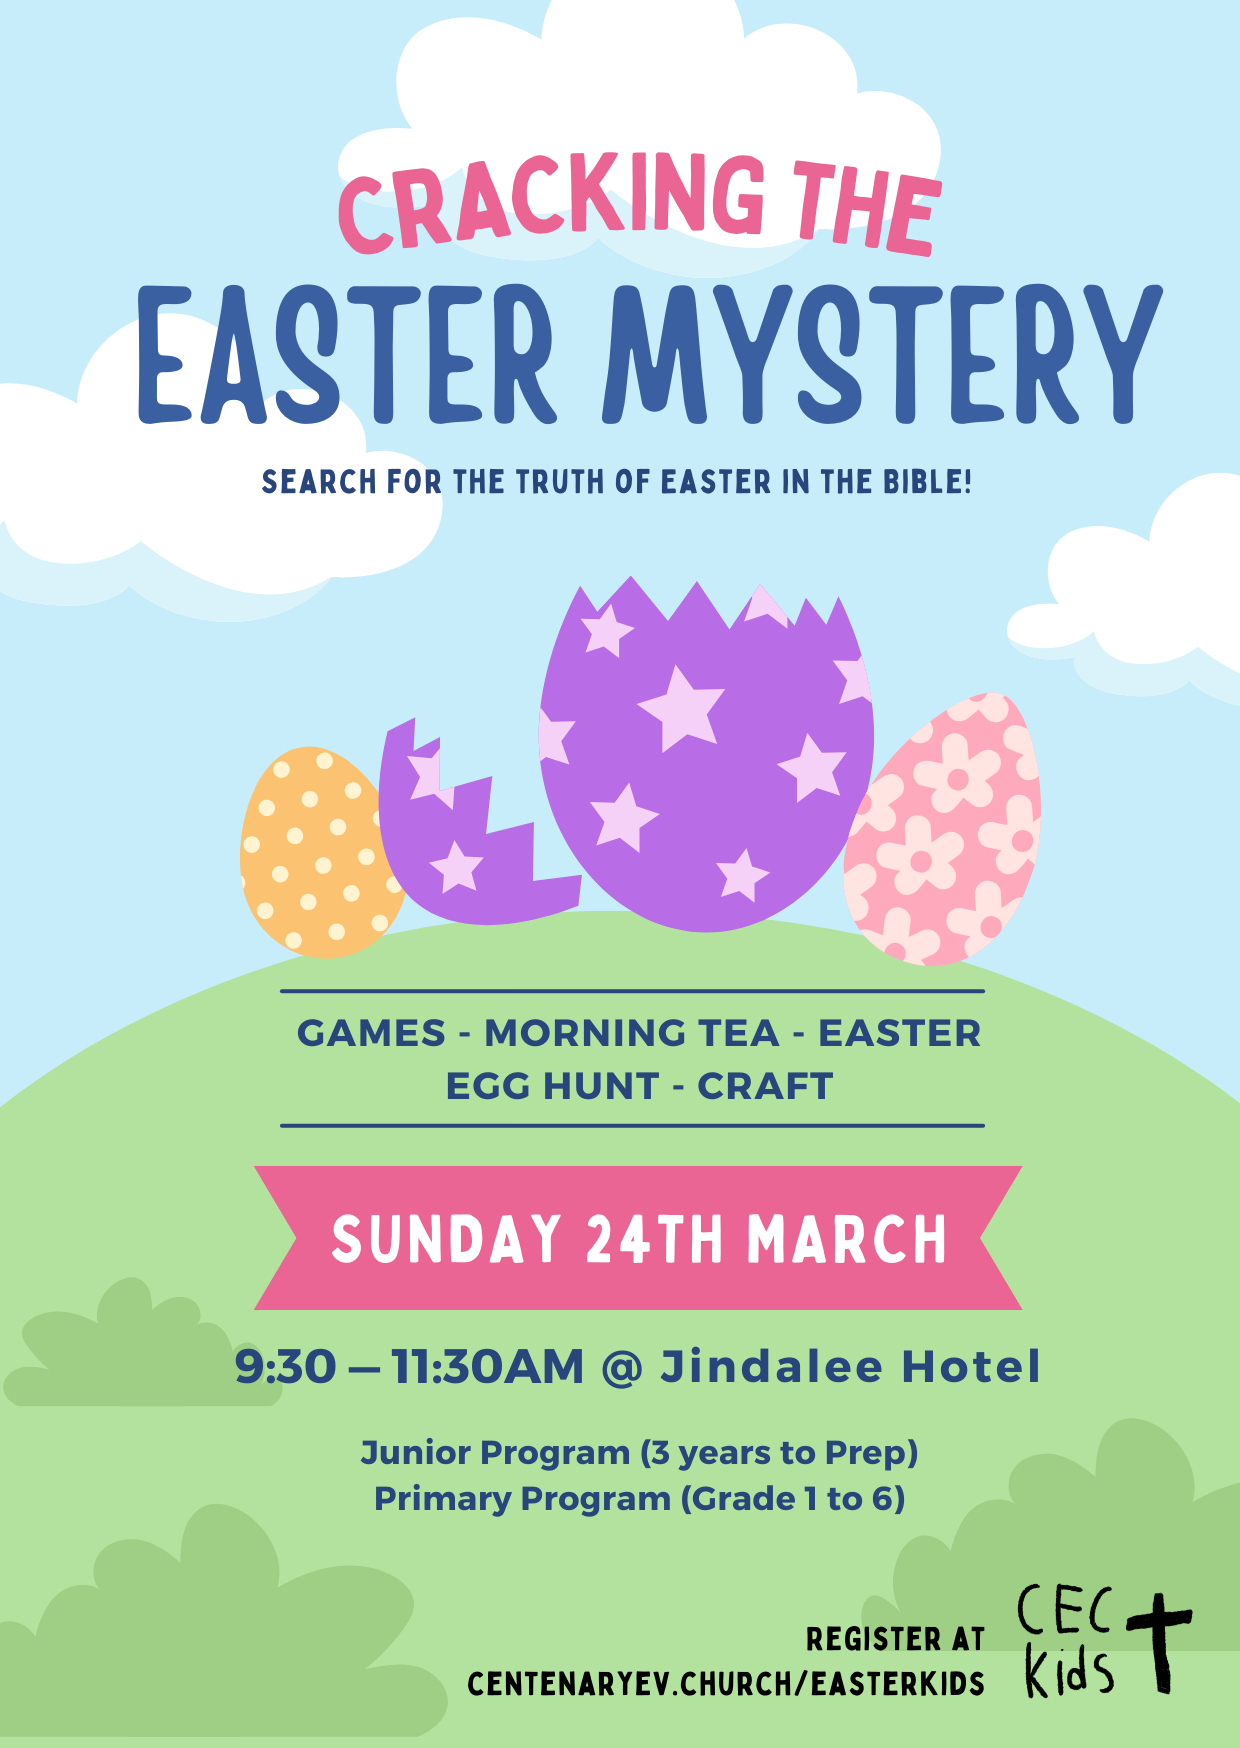 Invitation to Kids Church - Cracking the Easter Mystery